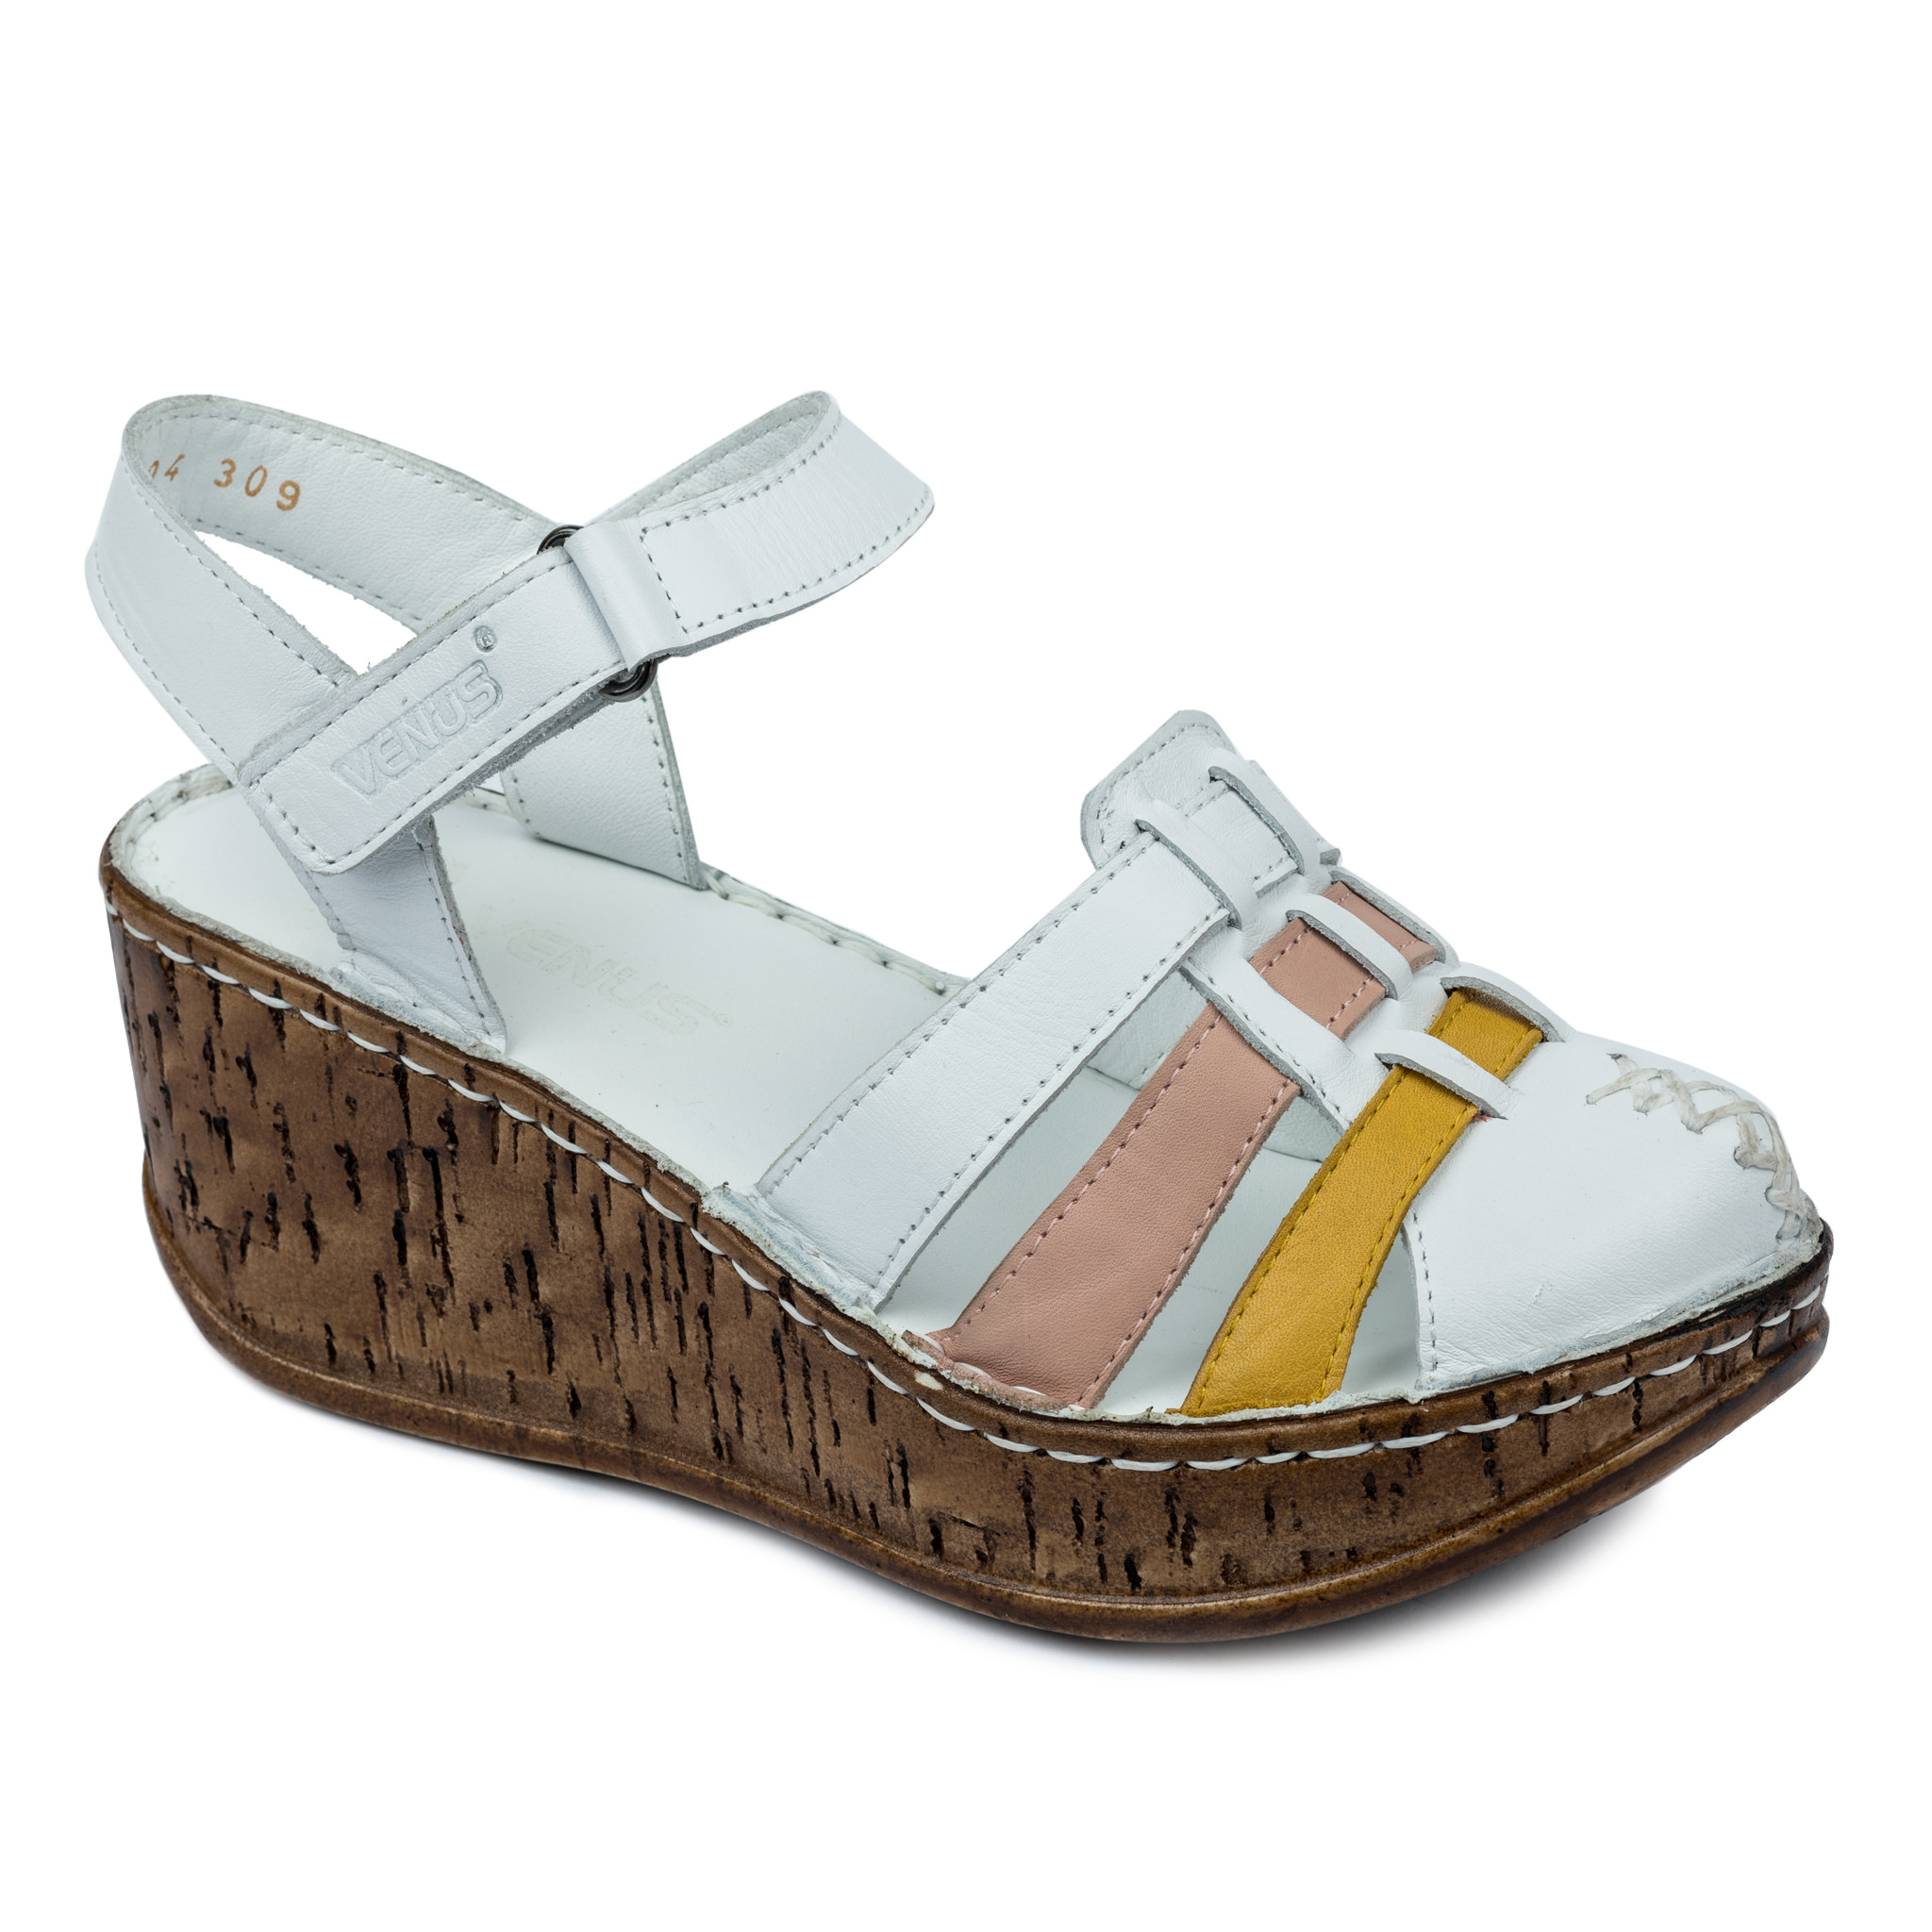 Leather sandals A191 - WHITE